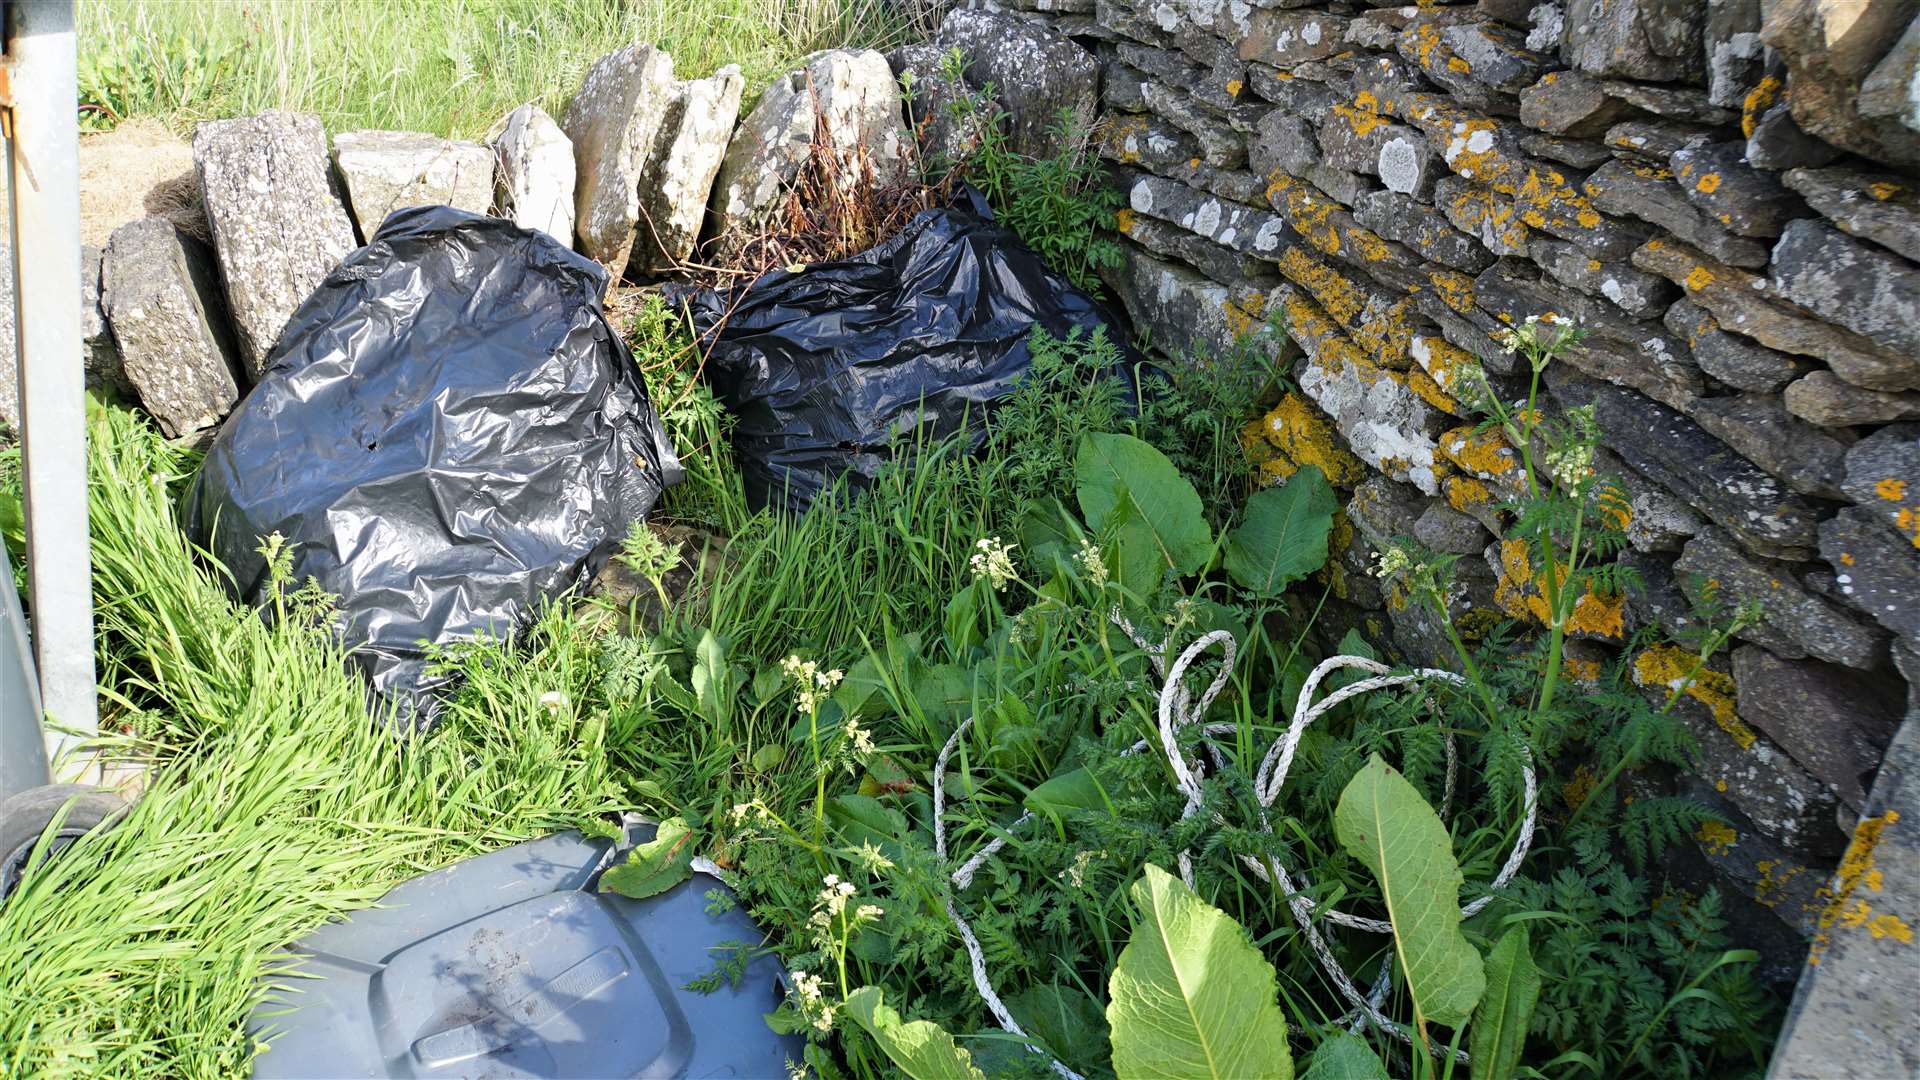 Fly tipped garden waste at Castle of Old Wick car park. Picture: DGS